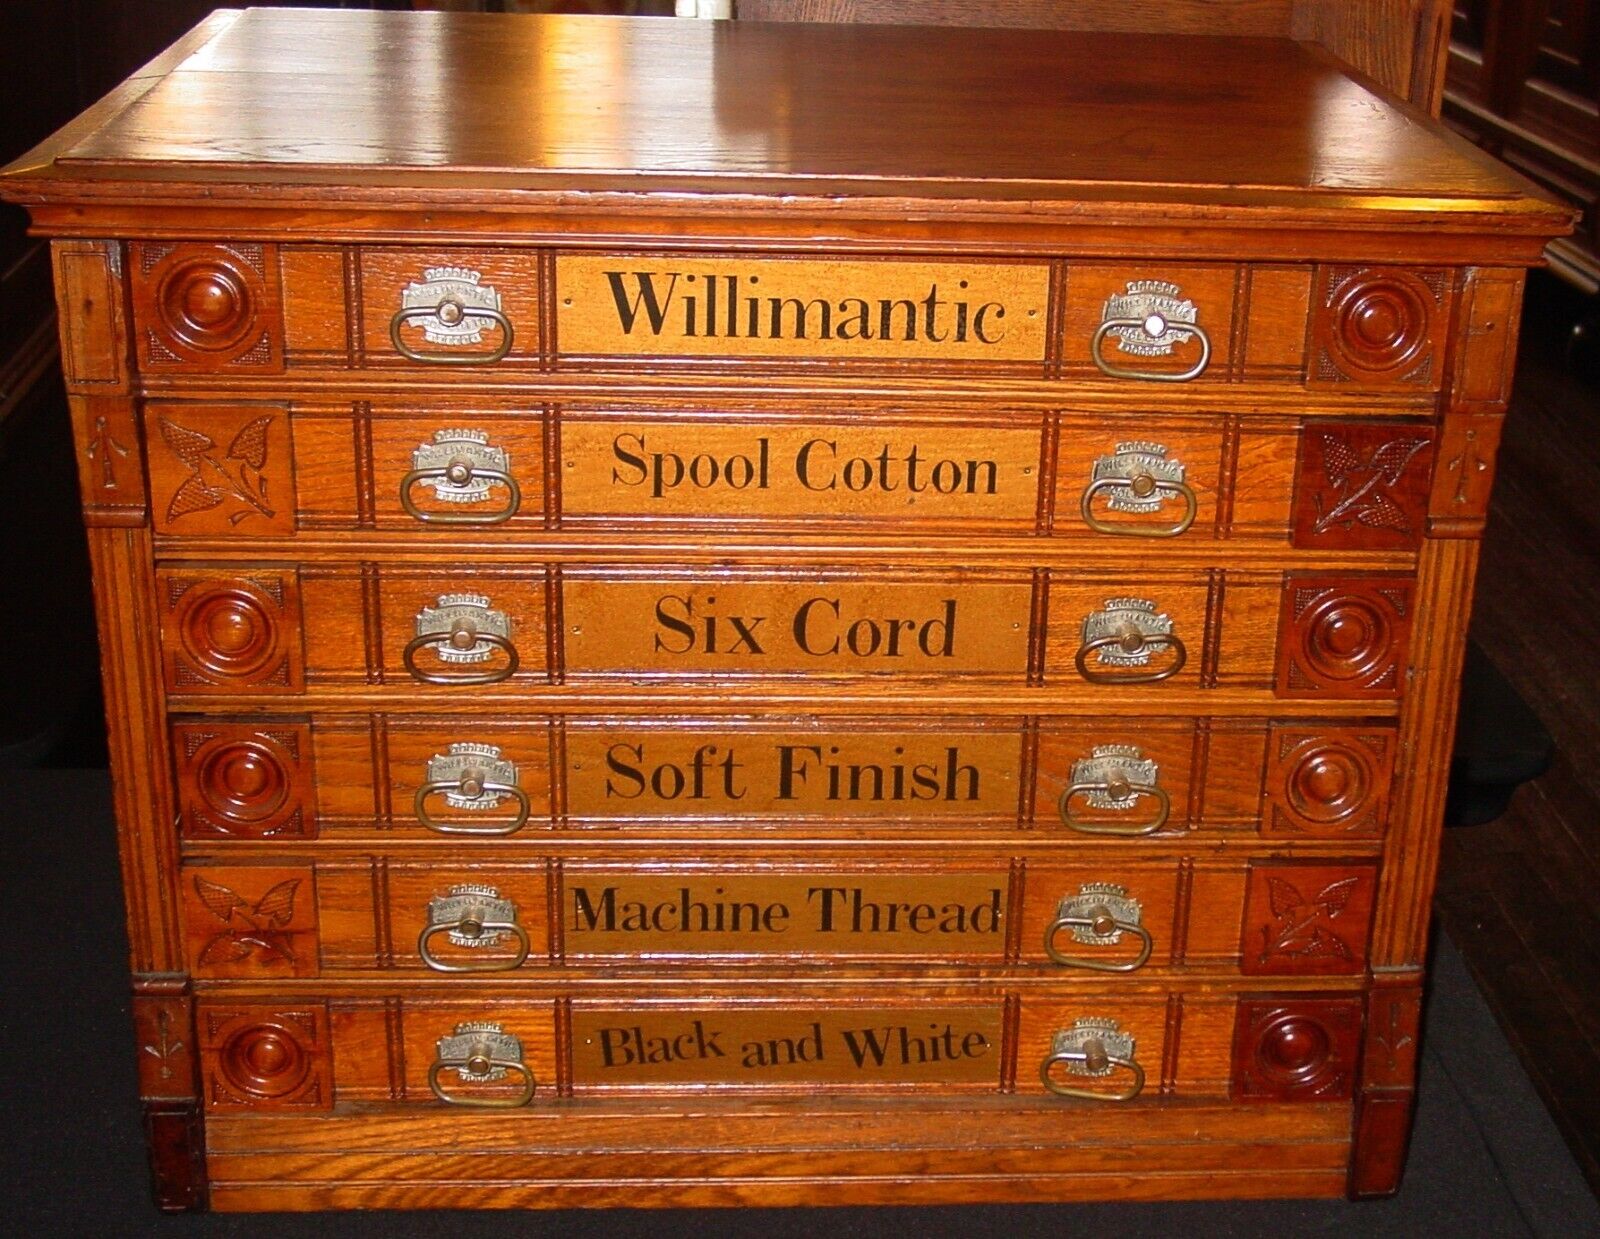 Exceotional Antique Willimantic Spool Thread Cabinet With Owl Motif----15837